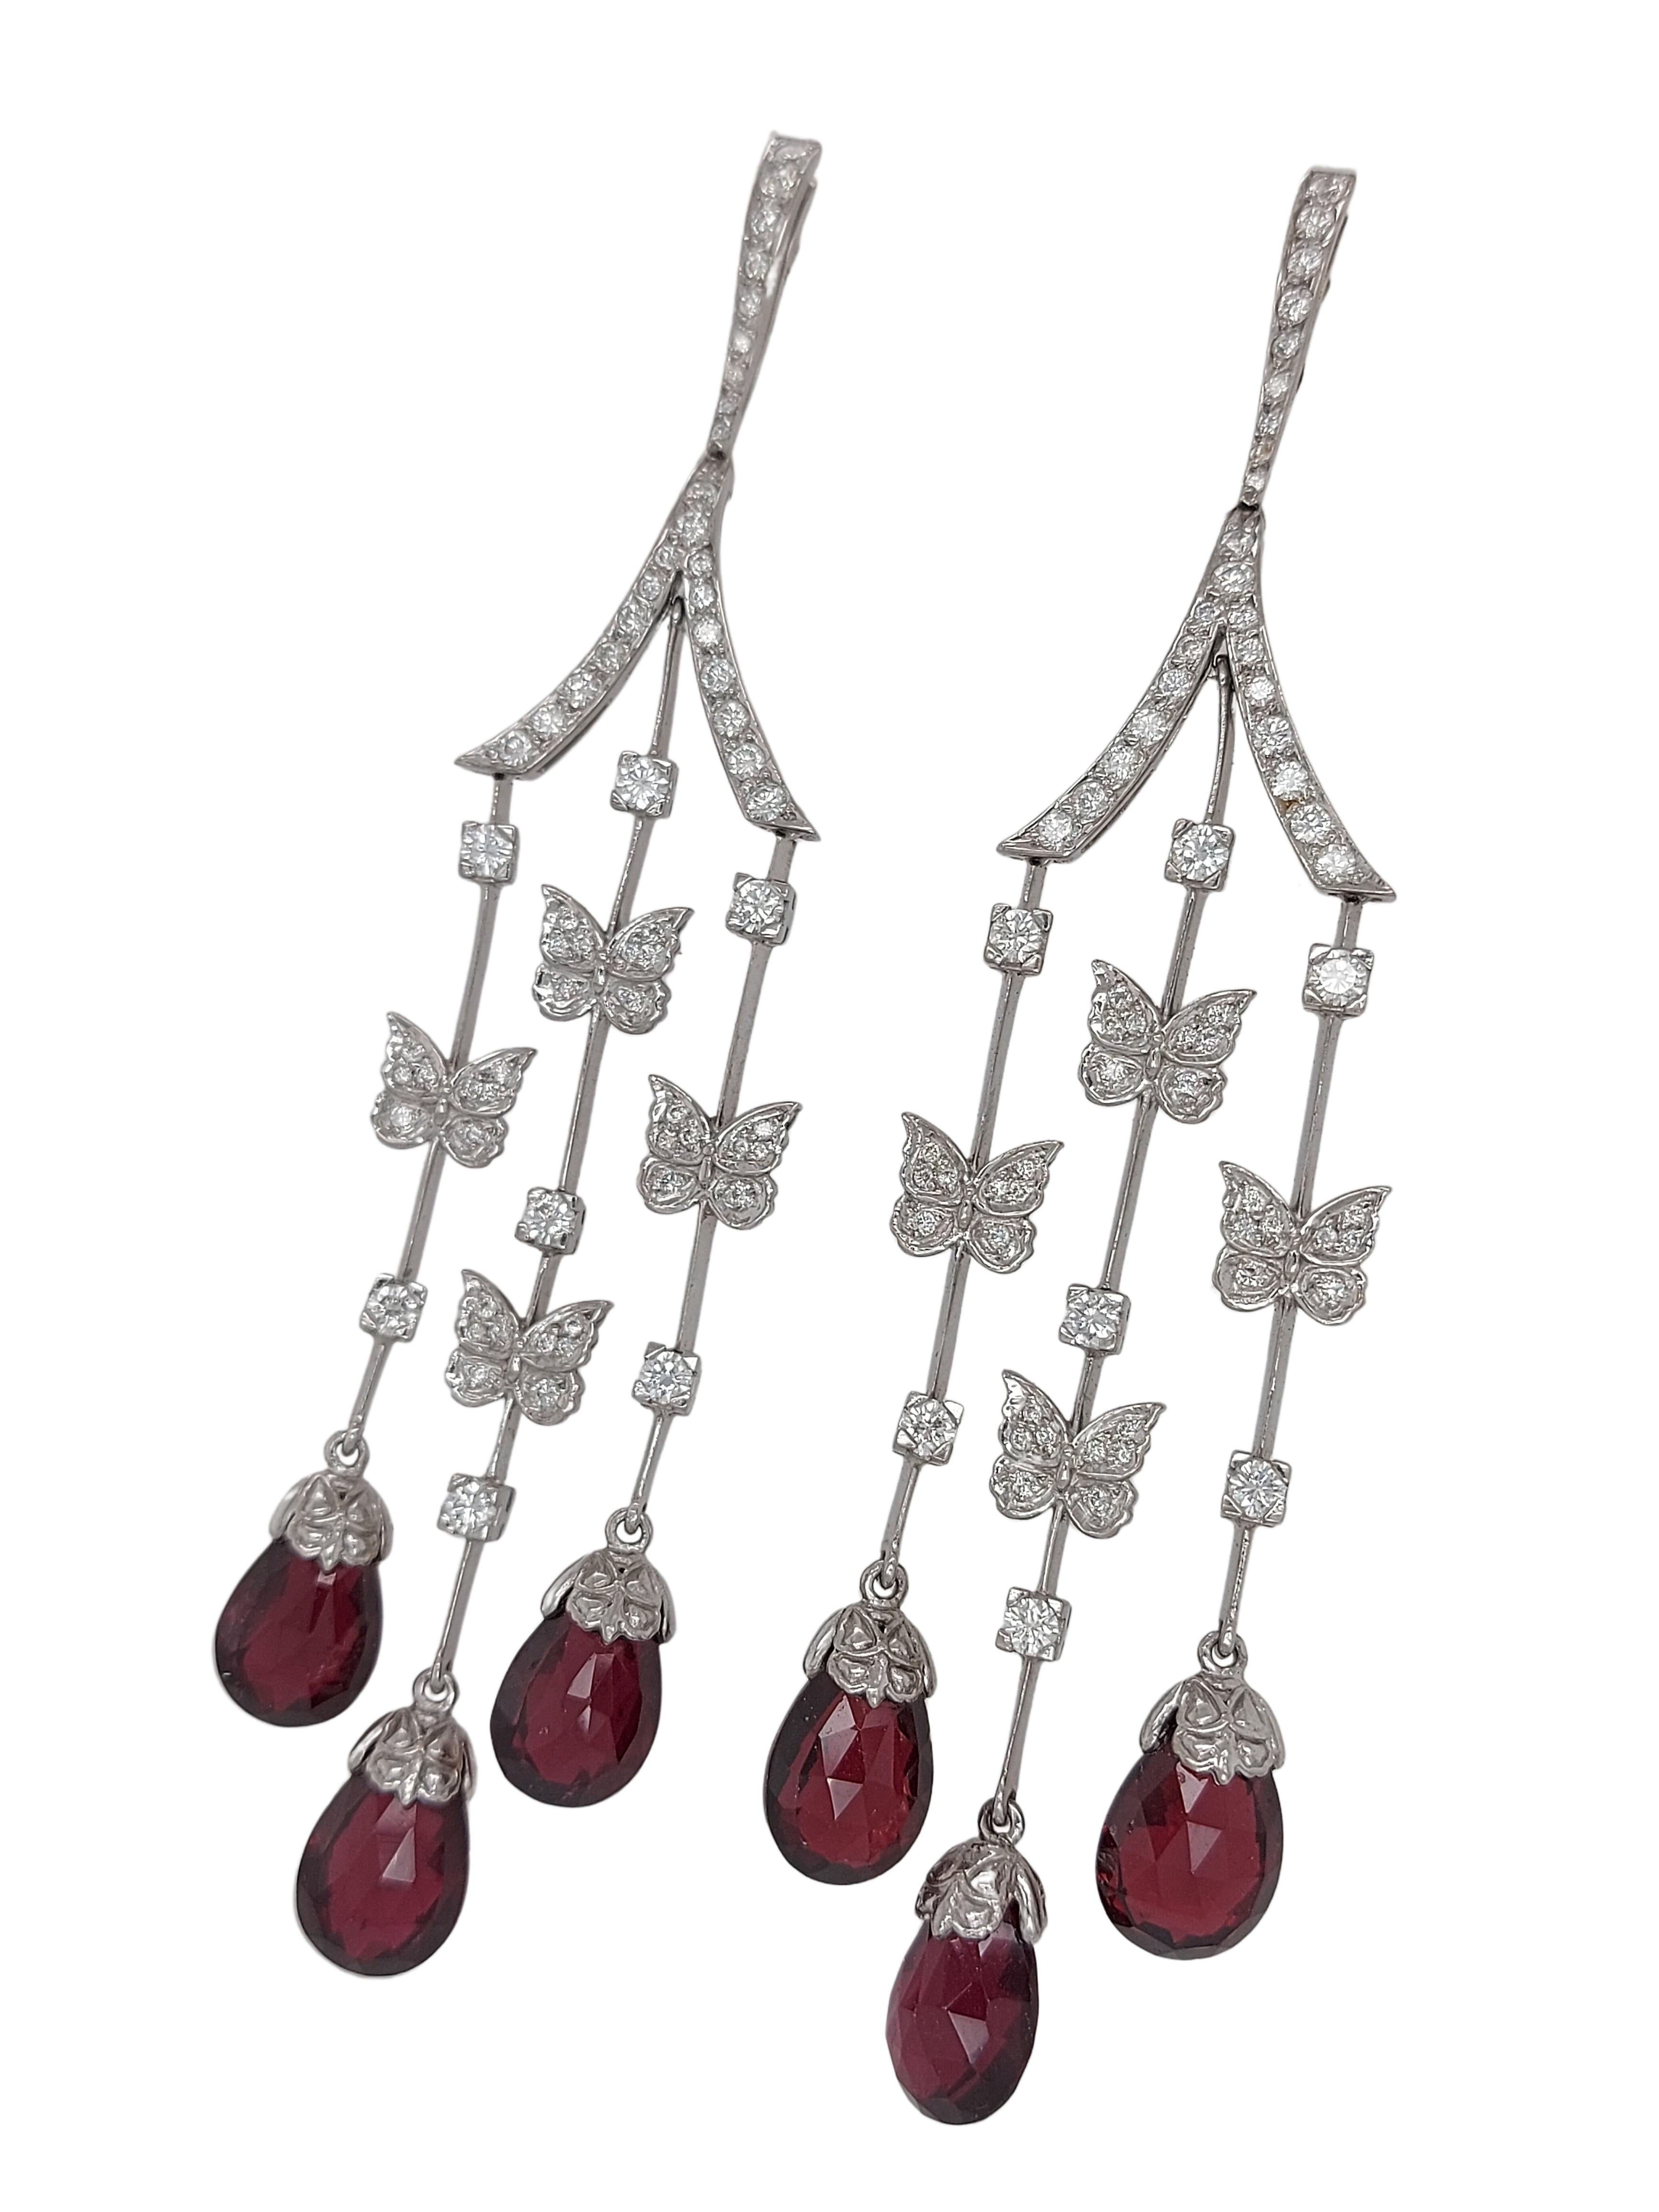 Carrera Y Carrera Earrings Butterfly Collection 18k white Gold Diamonds&Rubelite For Sale 1